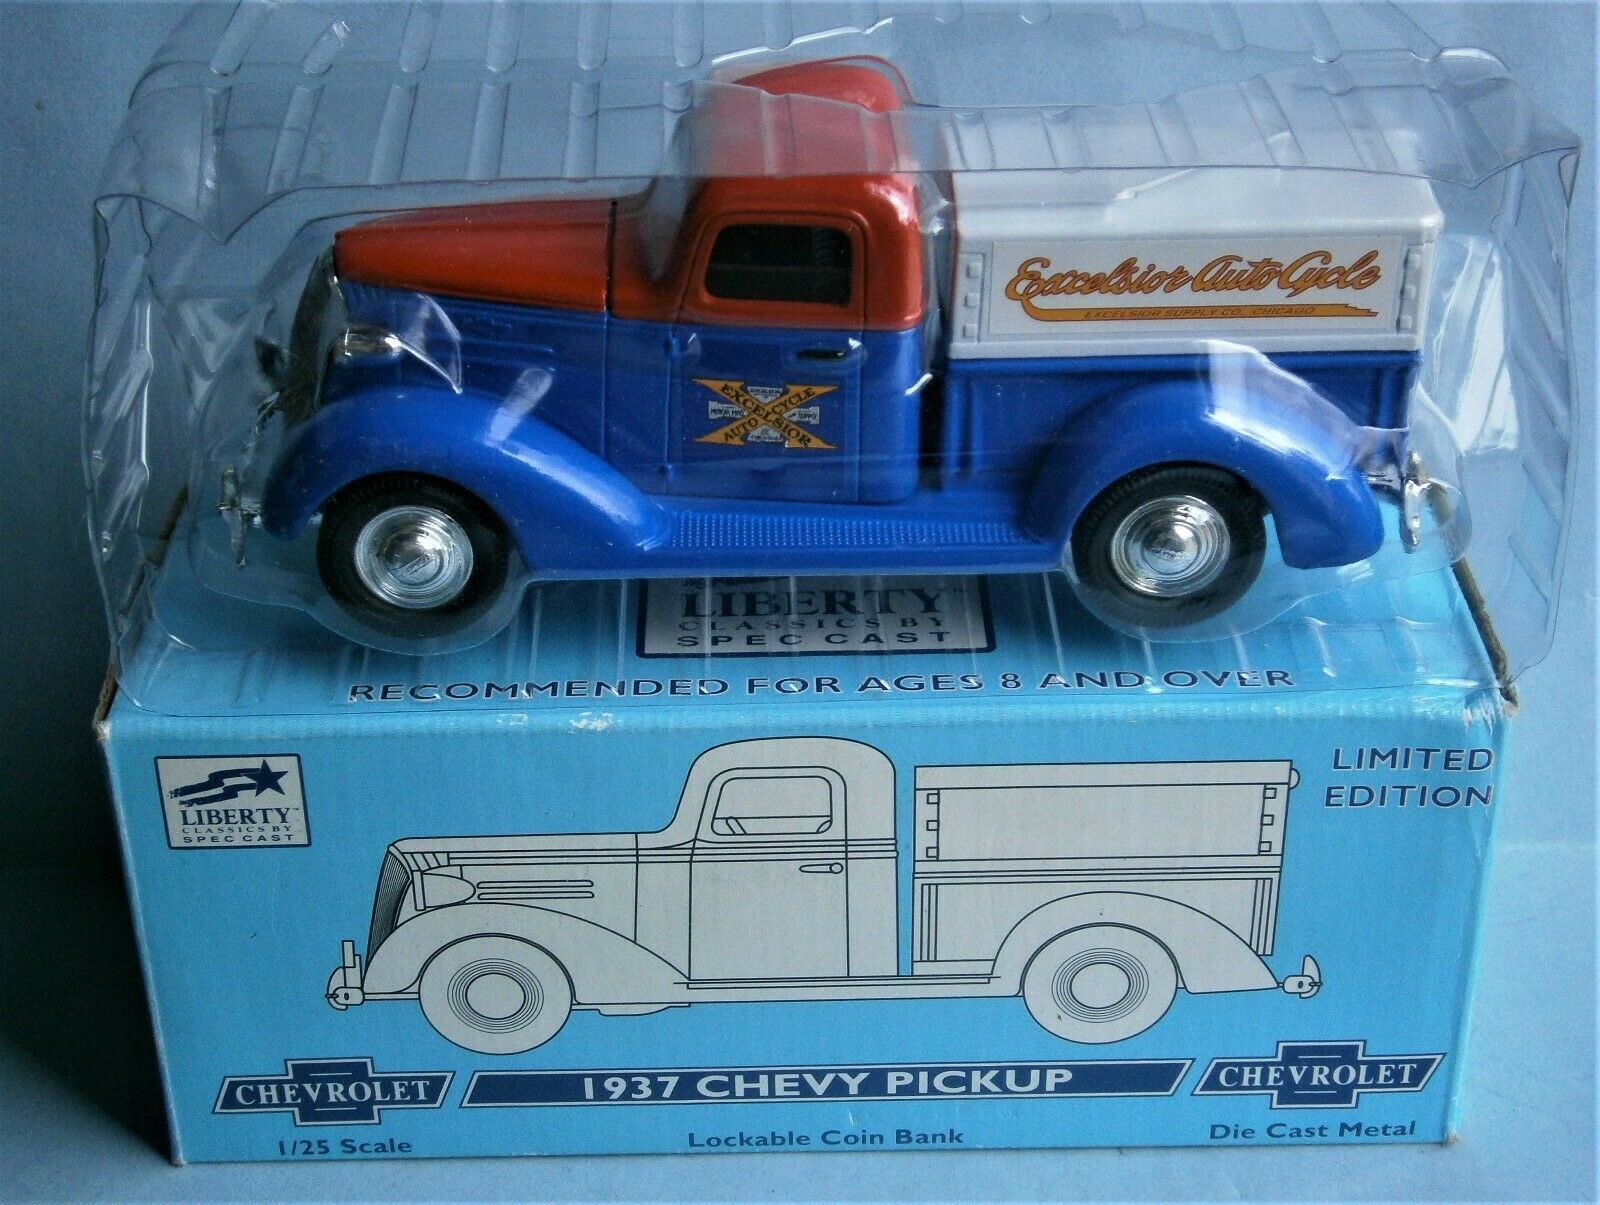 1937 Chevy Pickup Coin Bank by Liberty Classics made for Excelsior Auto ...